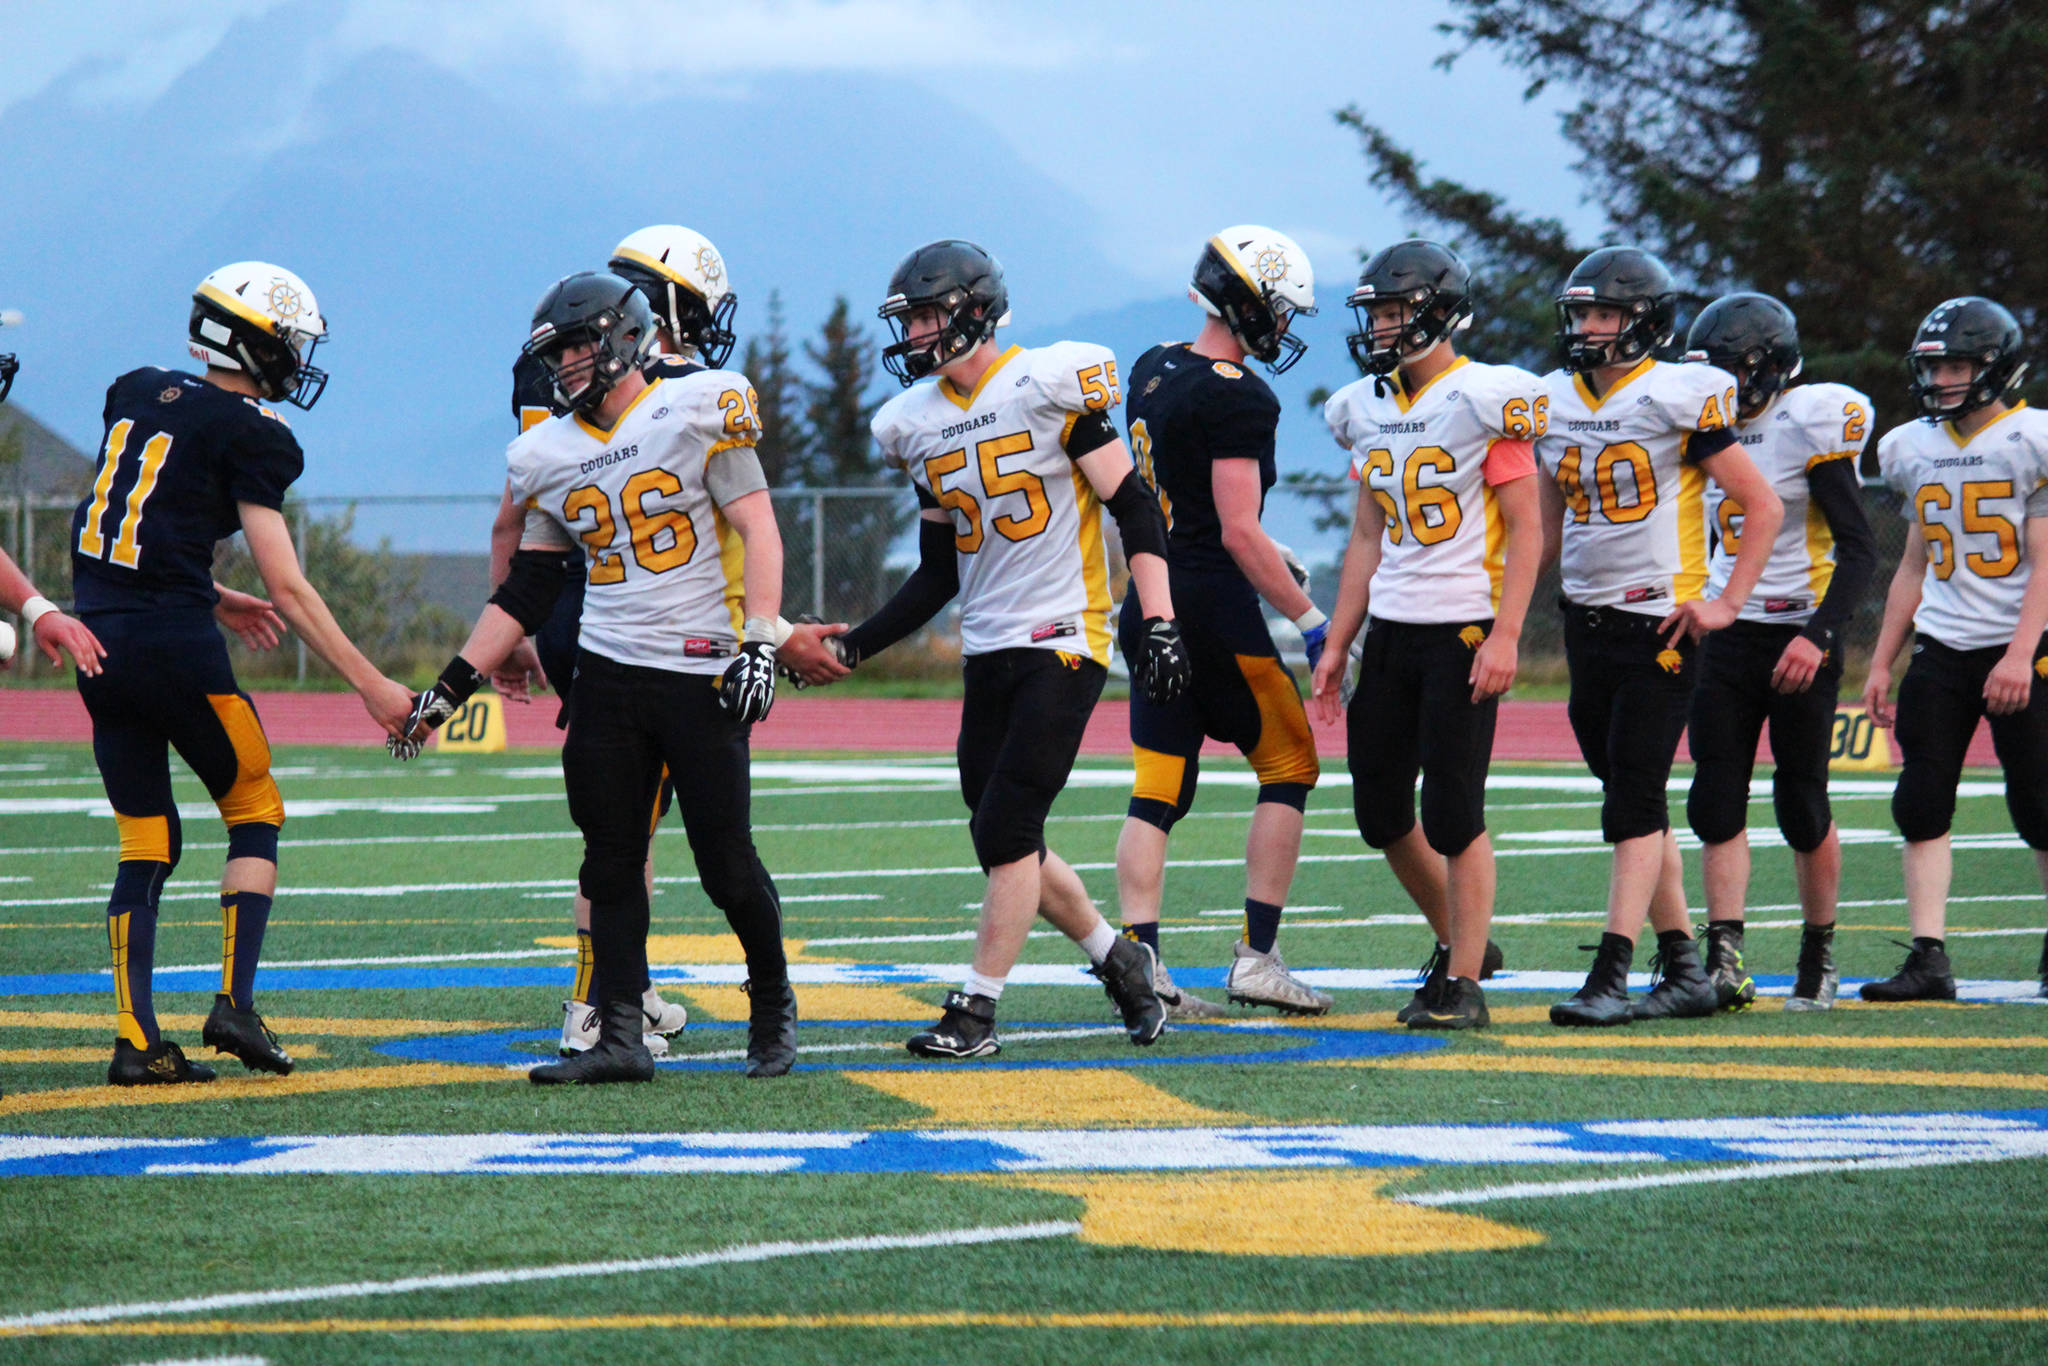 Led by seniors David Sanarov (26), Nikit Anufriev (55) and Dimitry Kuzmin (66), the Head of the Bay Cougars shake hands with the Homer Mariner varsity football team after their game Friday, Sept. 29, 2017 at the Mariner field in Homer, Alaska. It was the last game for the Cougars this season, and the very last game for the team’s three seniors. (Photo by Megan Pacer/Homer News)